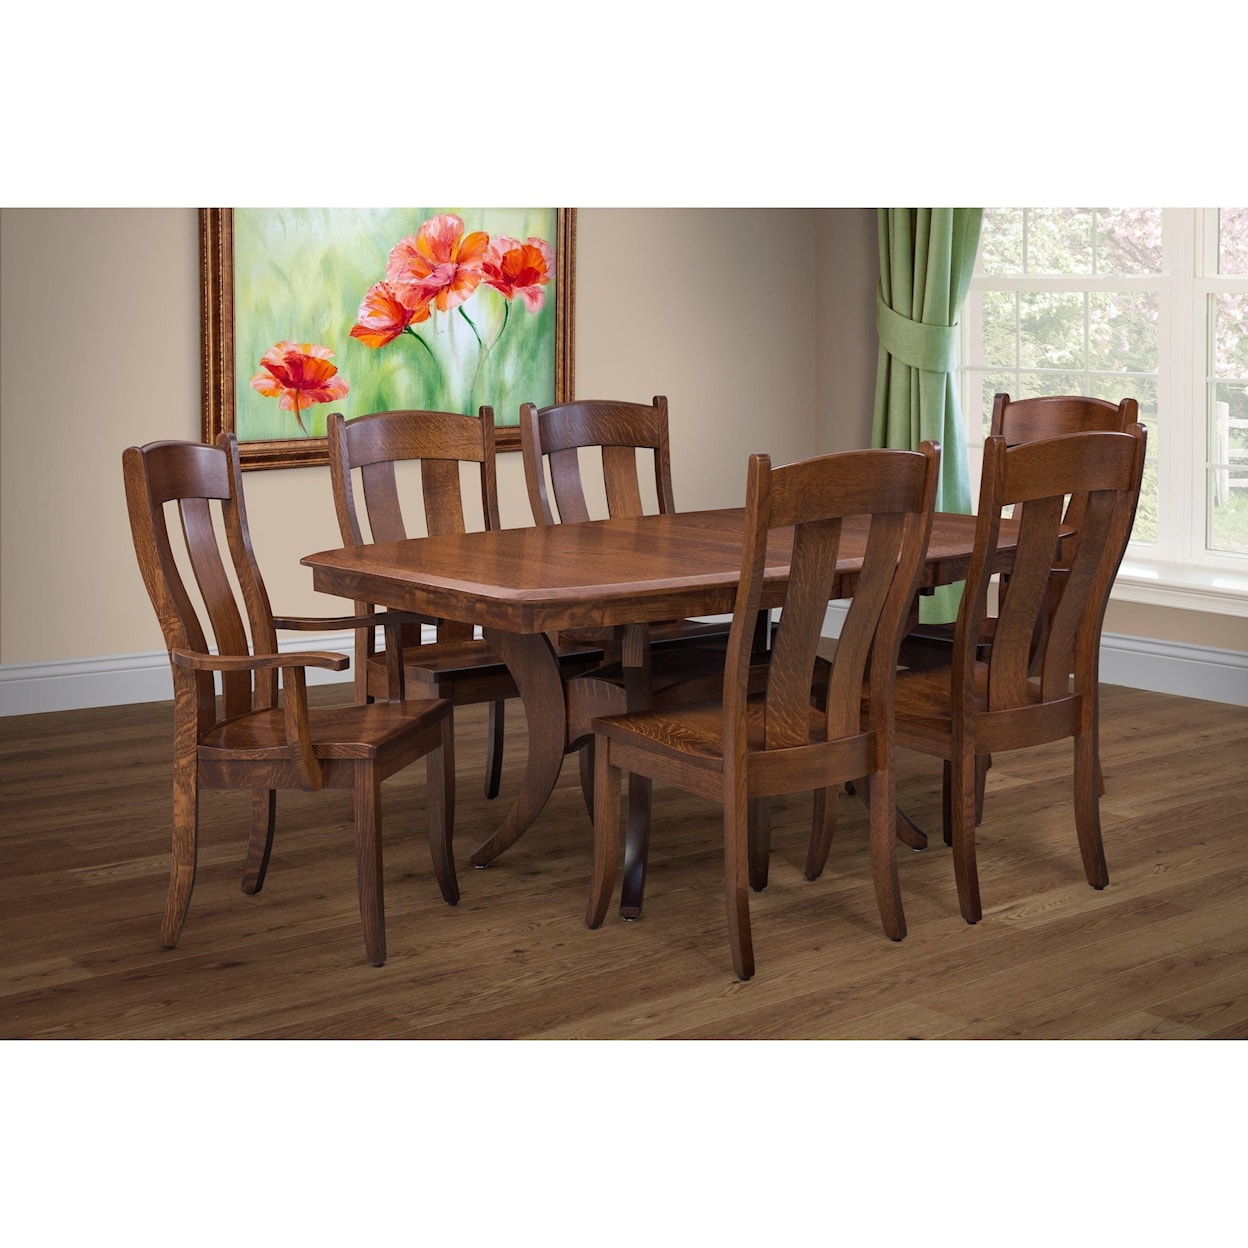 Trailway Amish Wood Fort Knox 42x66" Dining Table